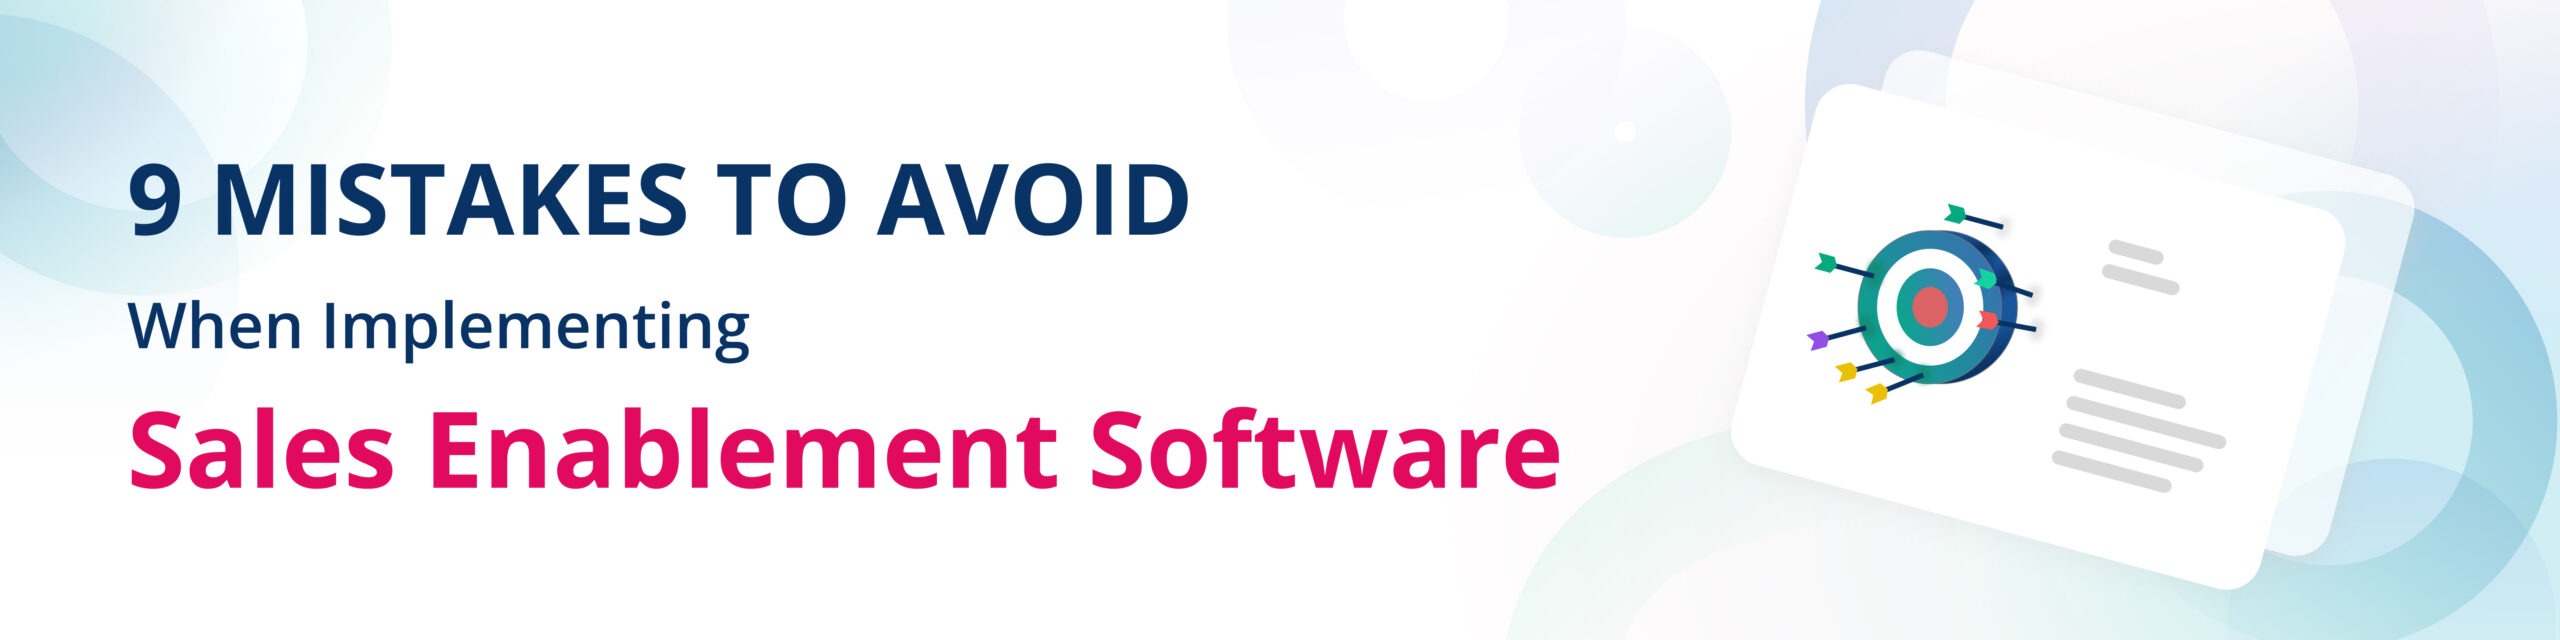 Sales Enablement Software: Mistakes to Avoid